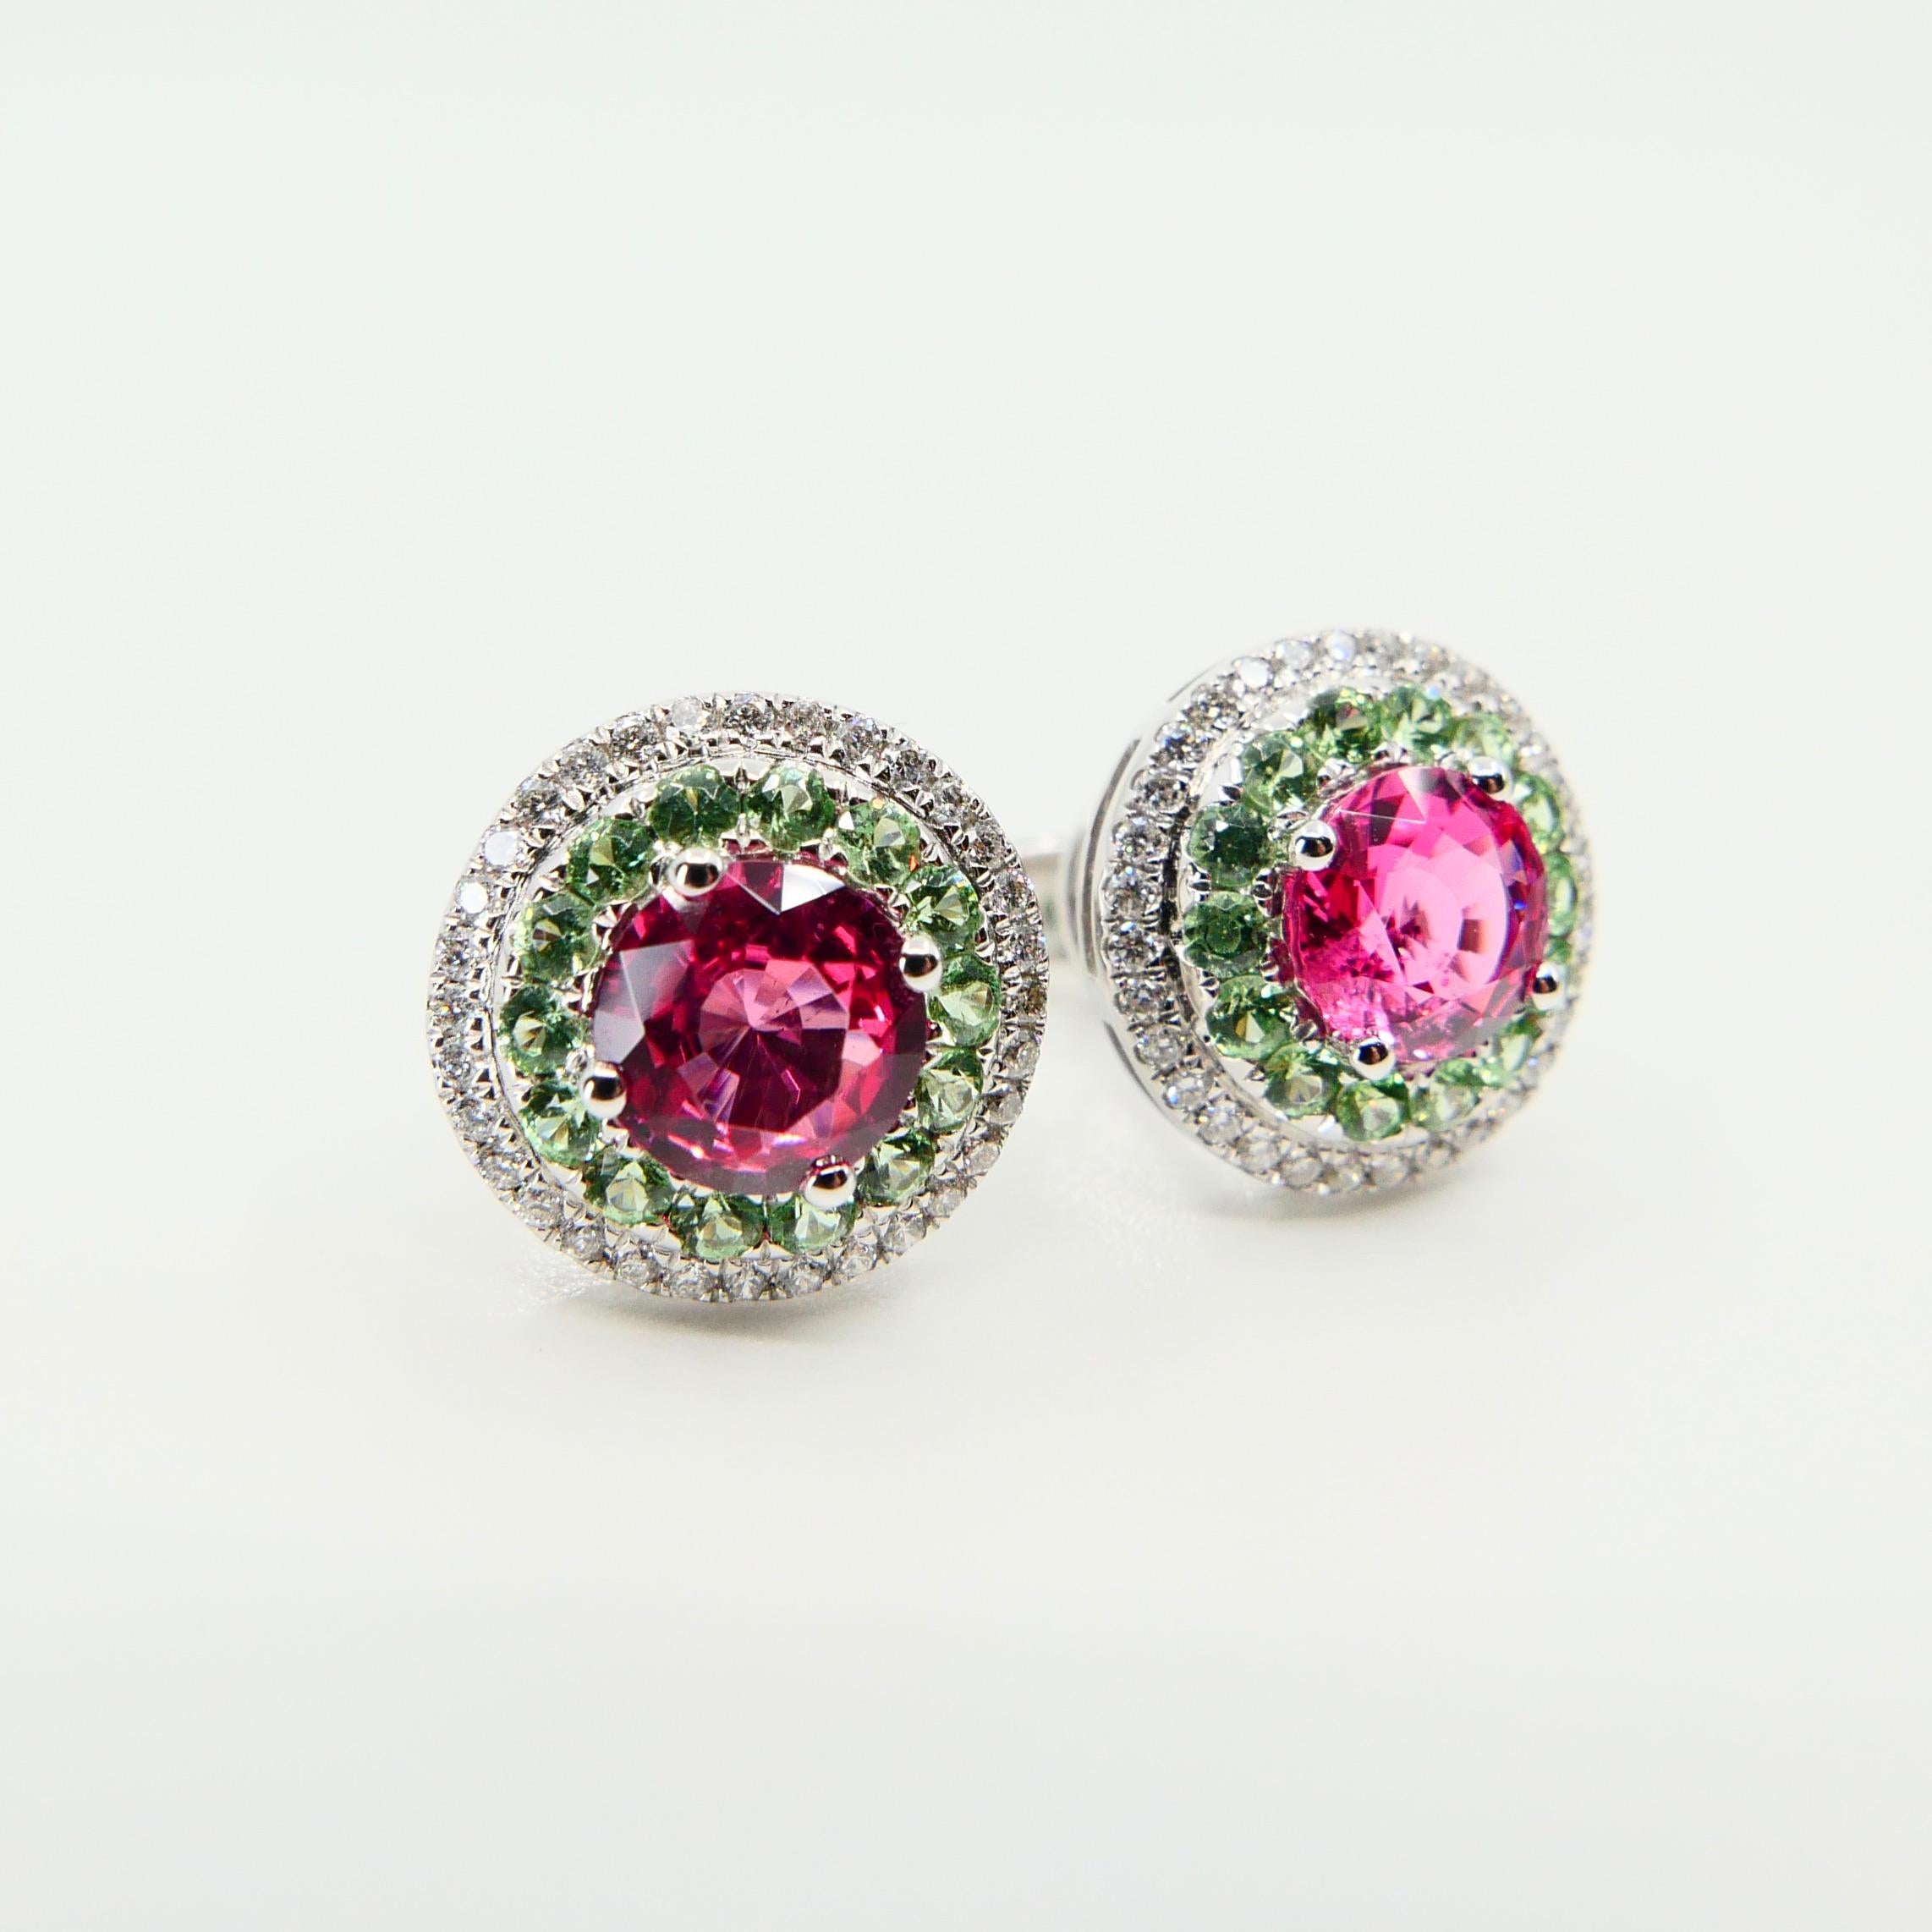 Natural 1.53 Carat Vivid Neon Pink Spinel Peridot and Diamond Earrings, 18k Gold 5